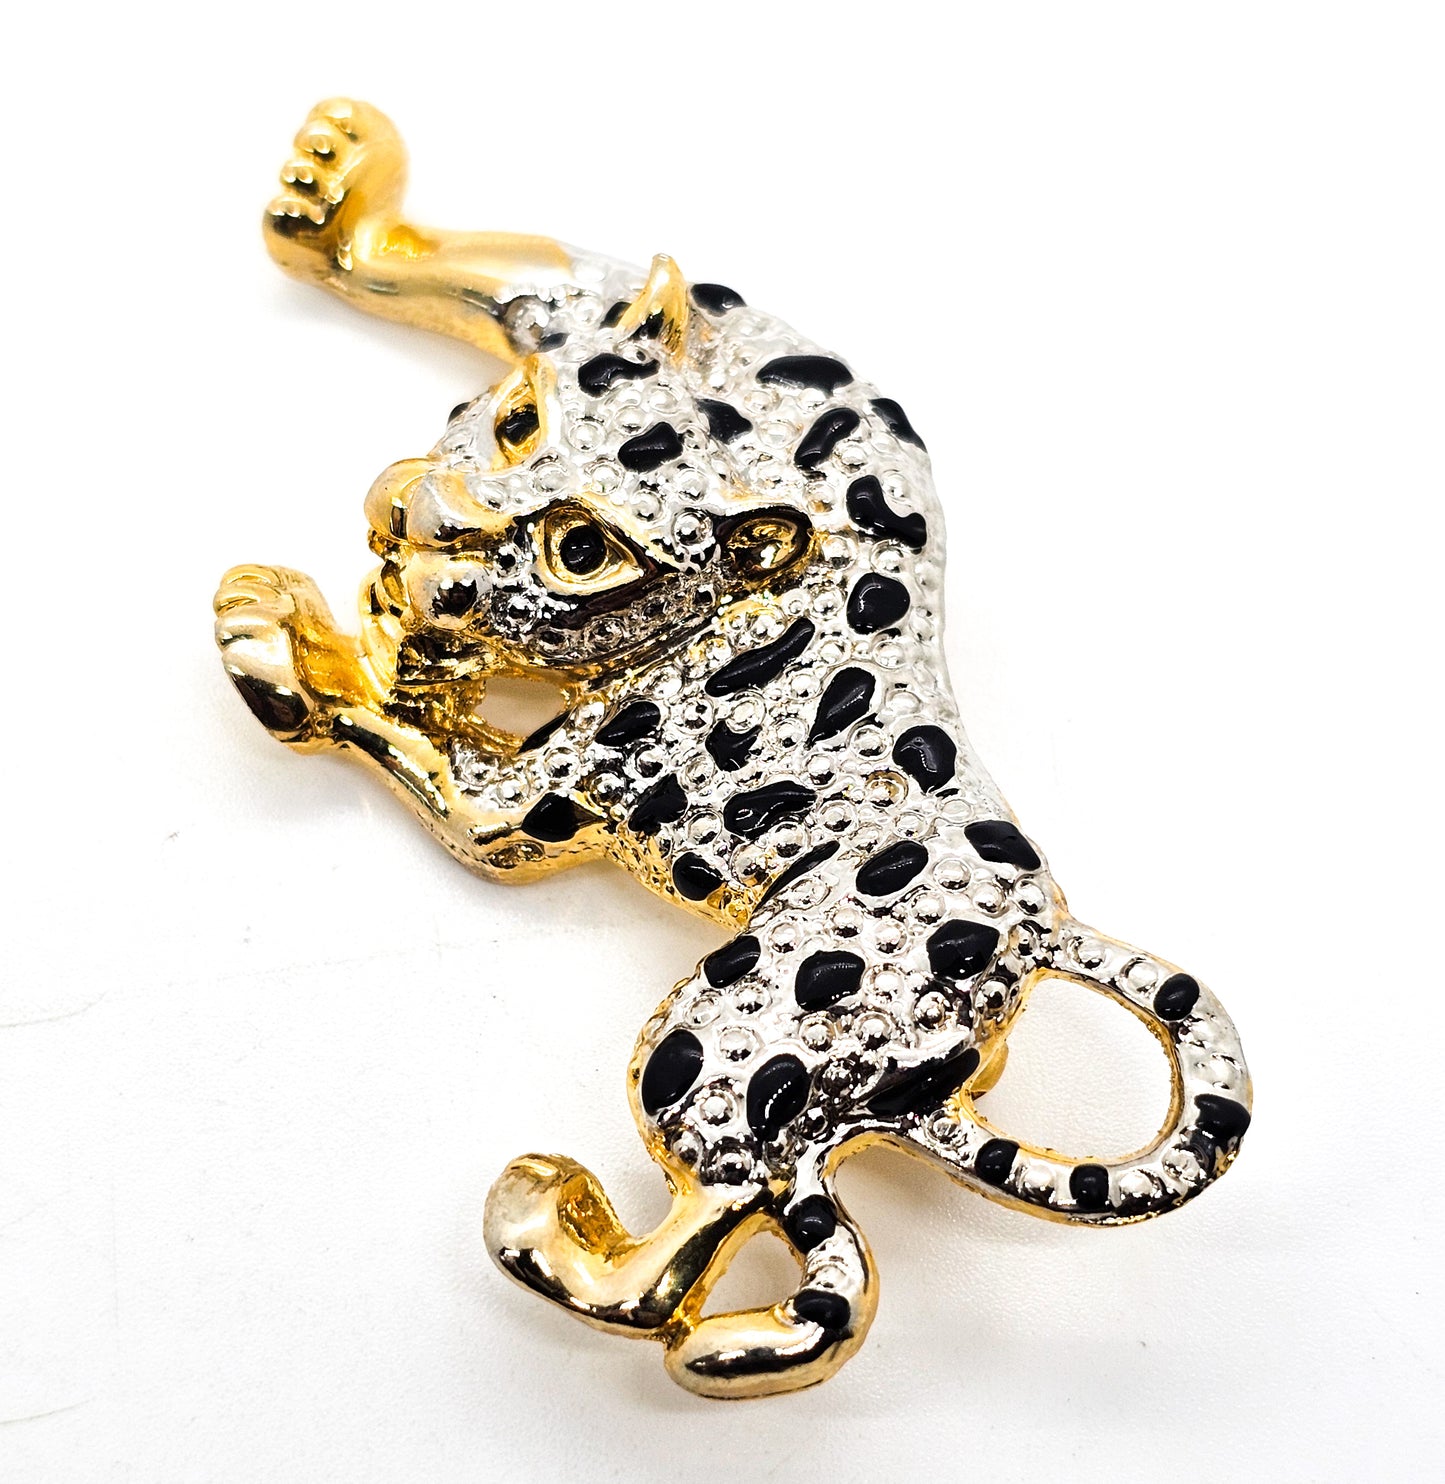 Big Cat Tri Color gold with black and silver accents vintage figural brooch